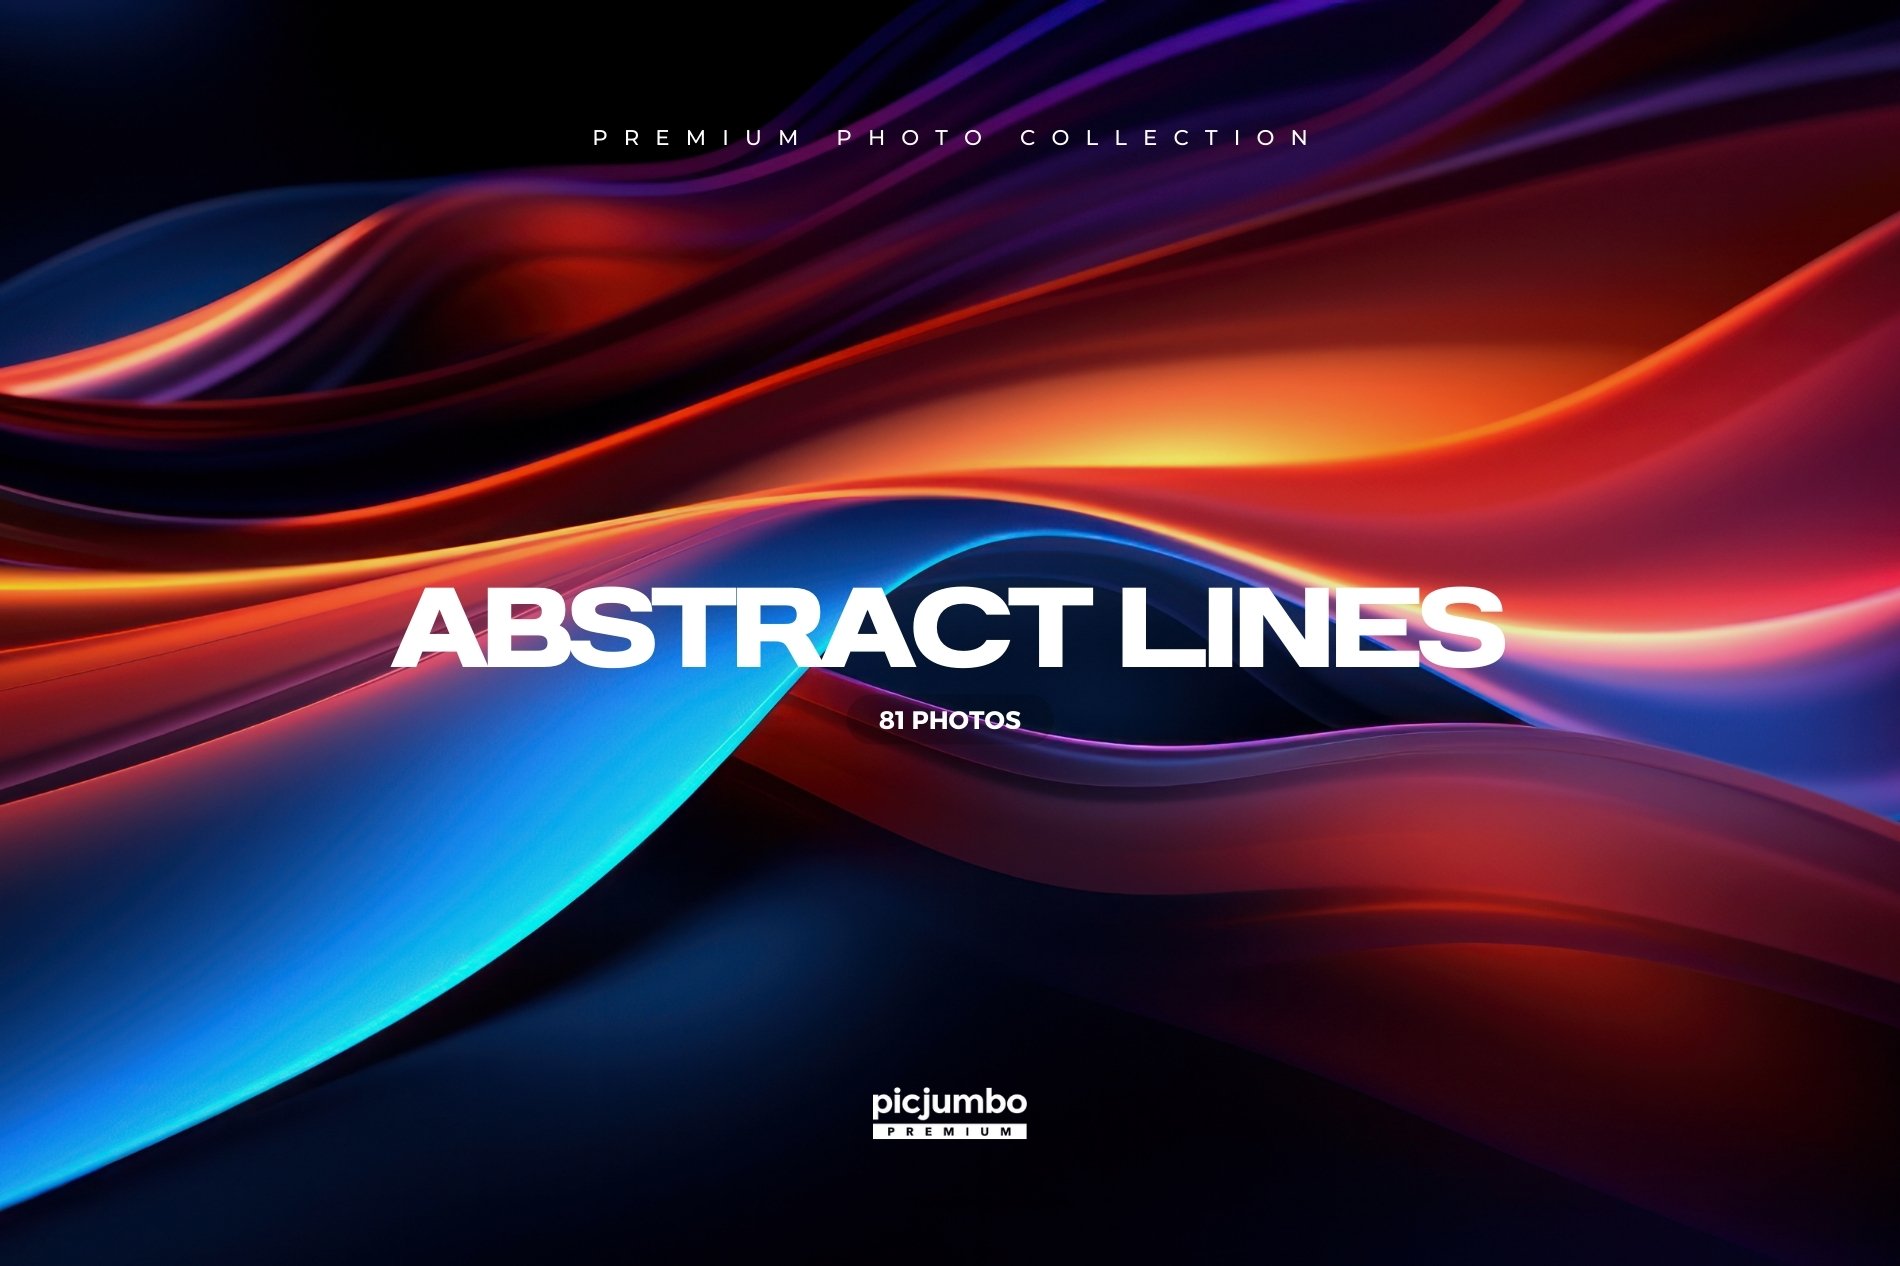 Download hi-res stock photos from our Abstract Lines PREMIUM Collection!